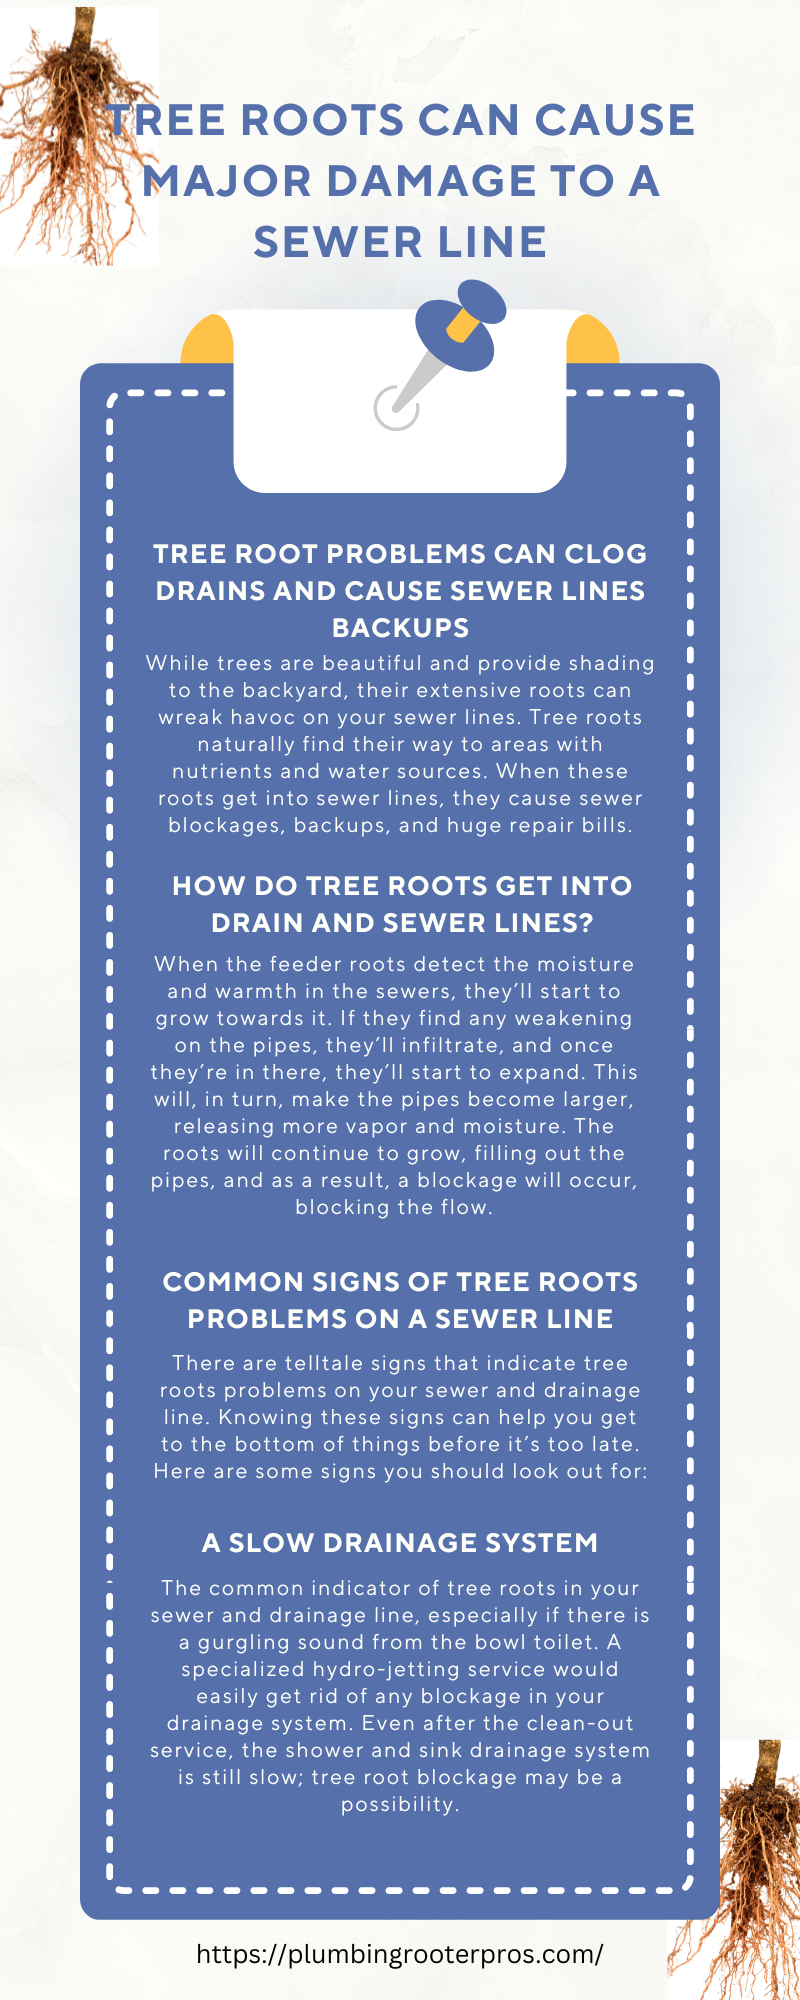 Tree Roots Can Cause Major Damage to a Sewer Line